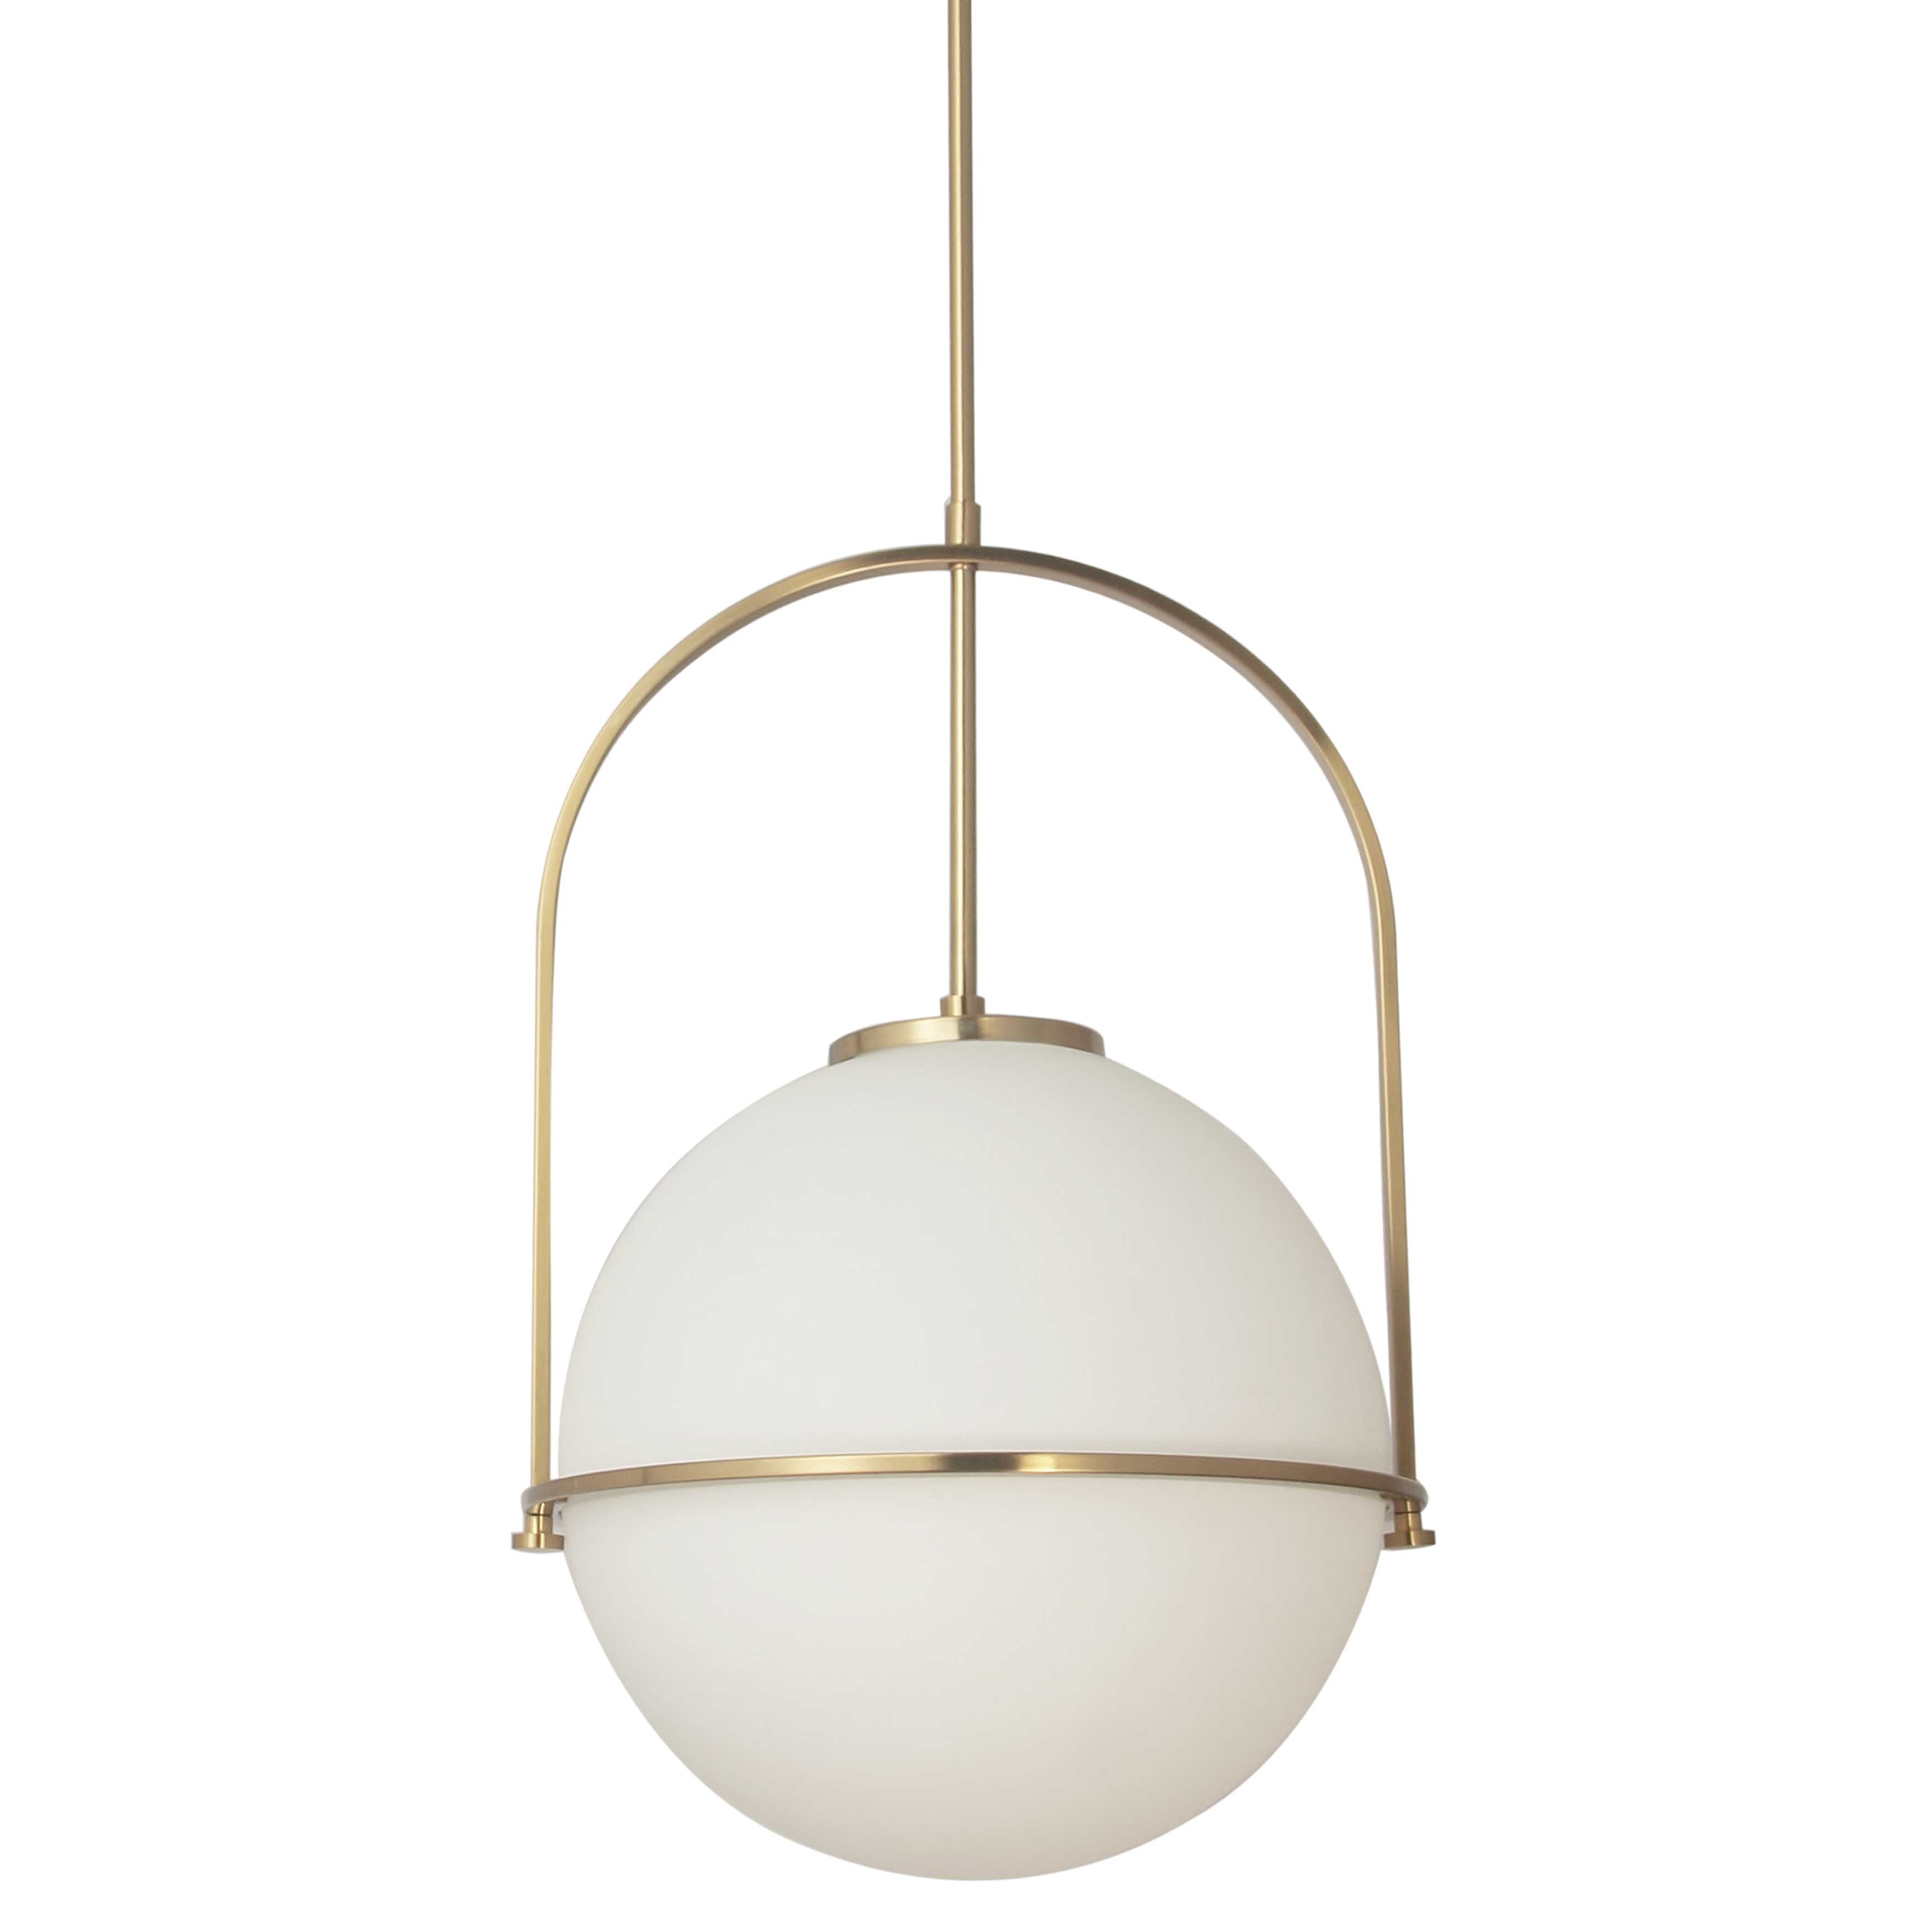 The Paola family of lighting incorporates a thoroughly up to date aesthetic in a clean geometric design. Linear elements soften the impact of a large globe at the center of the fixture. A metal frame in your choice of finish circles around an opal glass globe, casting soft, skin-friendly light. Another arm of the frame circles back over the globe, creating a longer drop profile. Paola lighting adds a focal point to a foyer or hallway, and welcome curves to a kitchen or dinette.